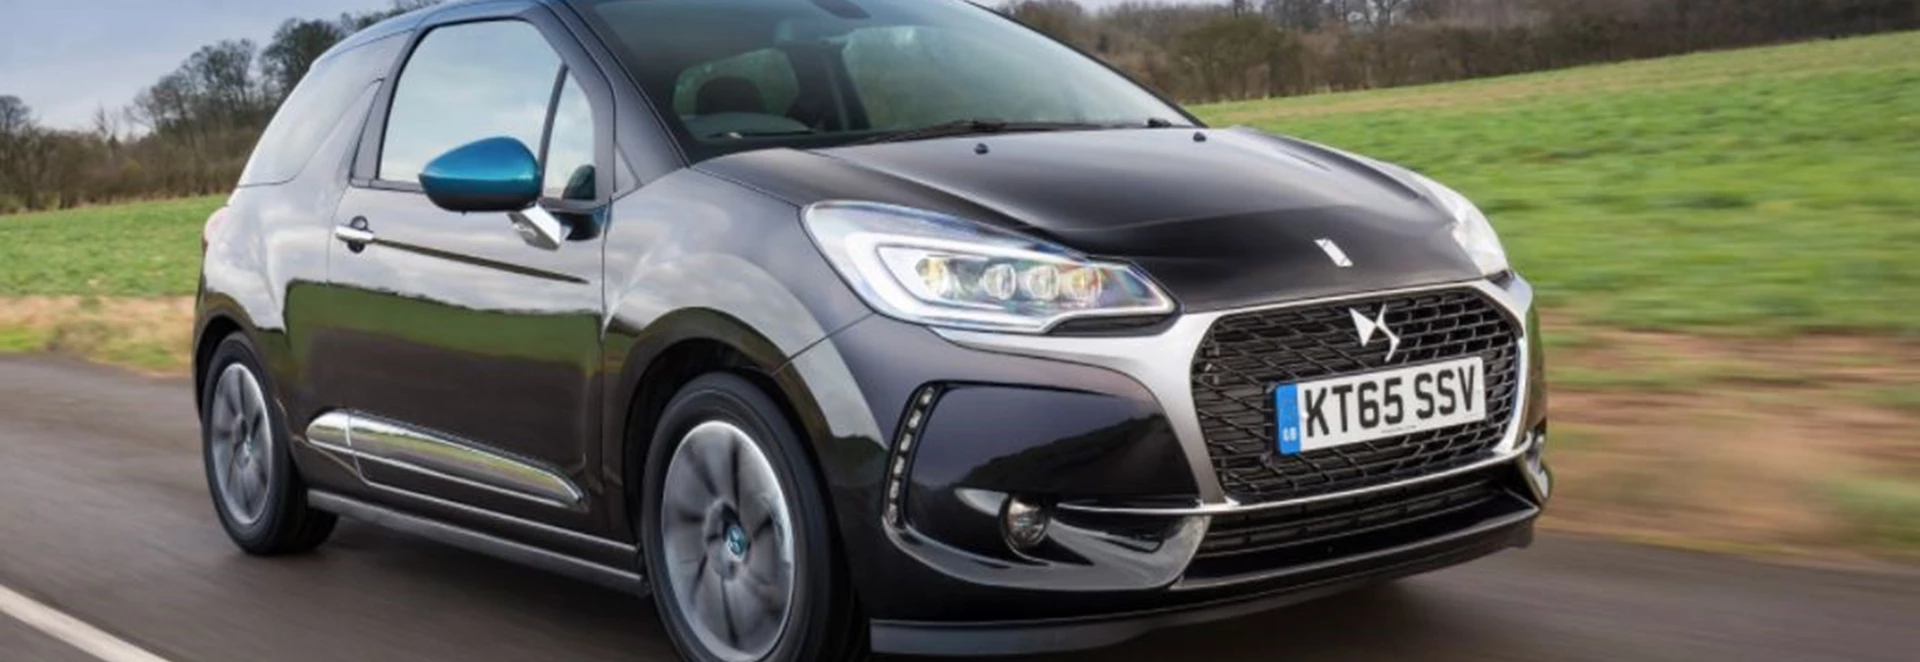 DS 3 Hatchback review 